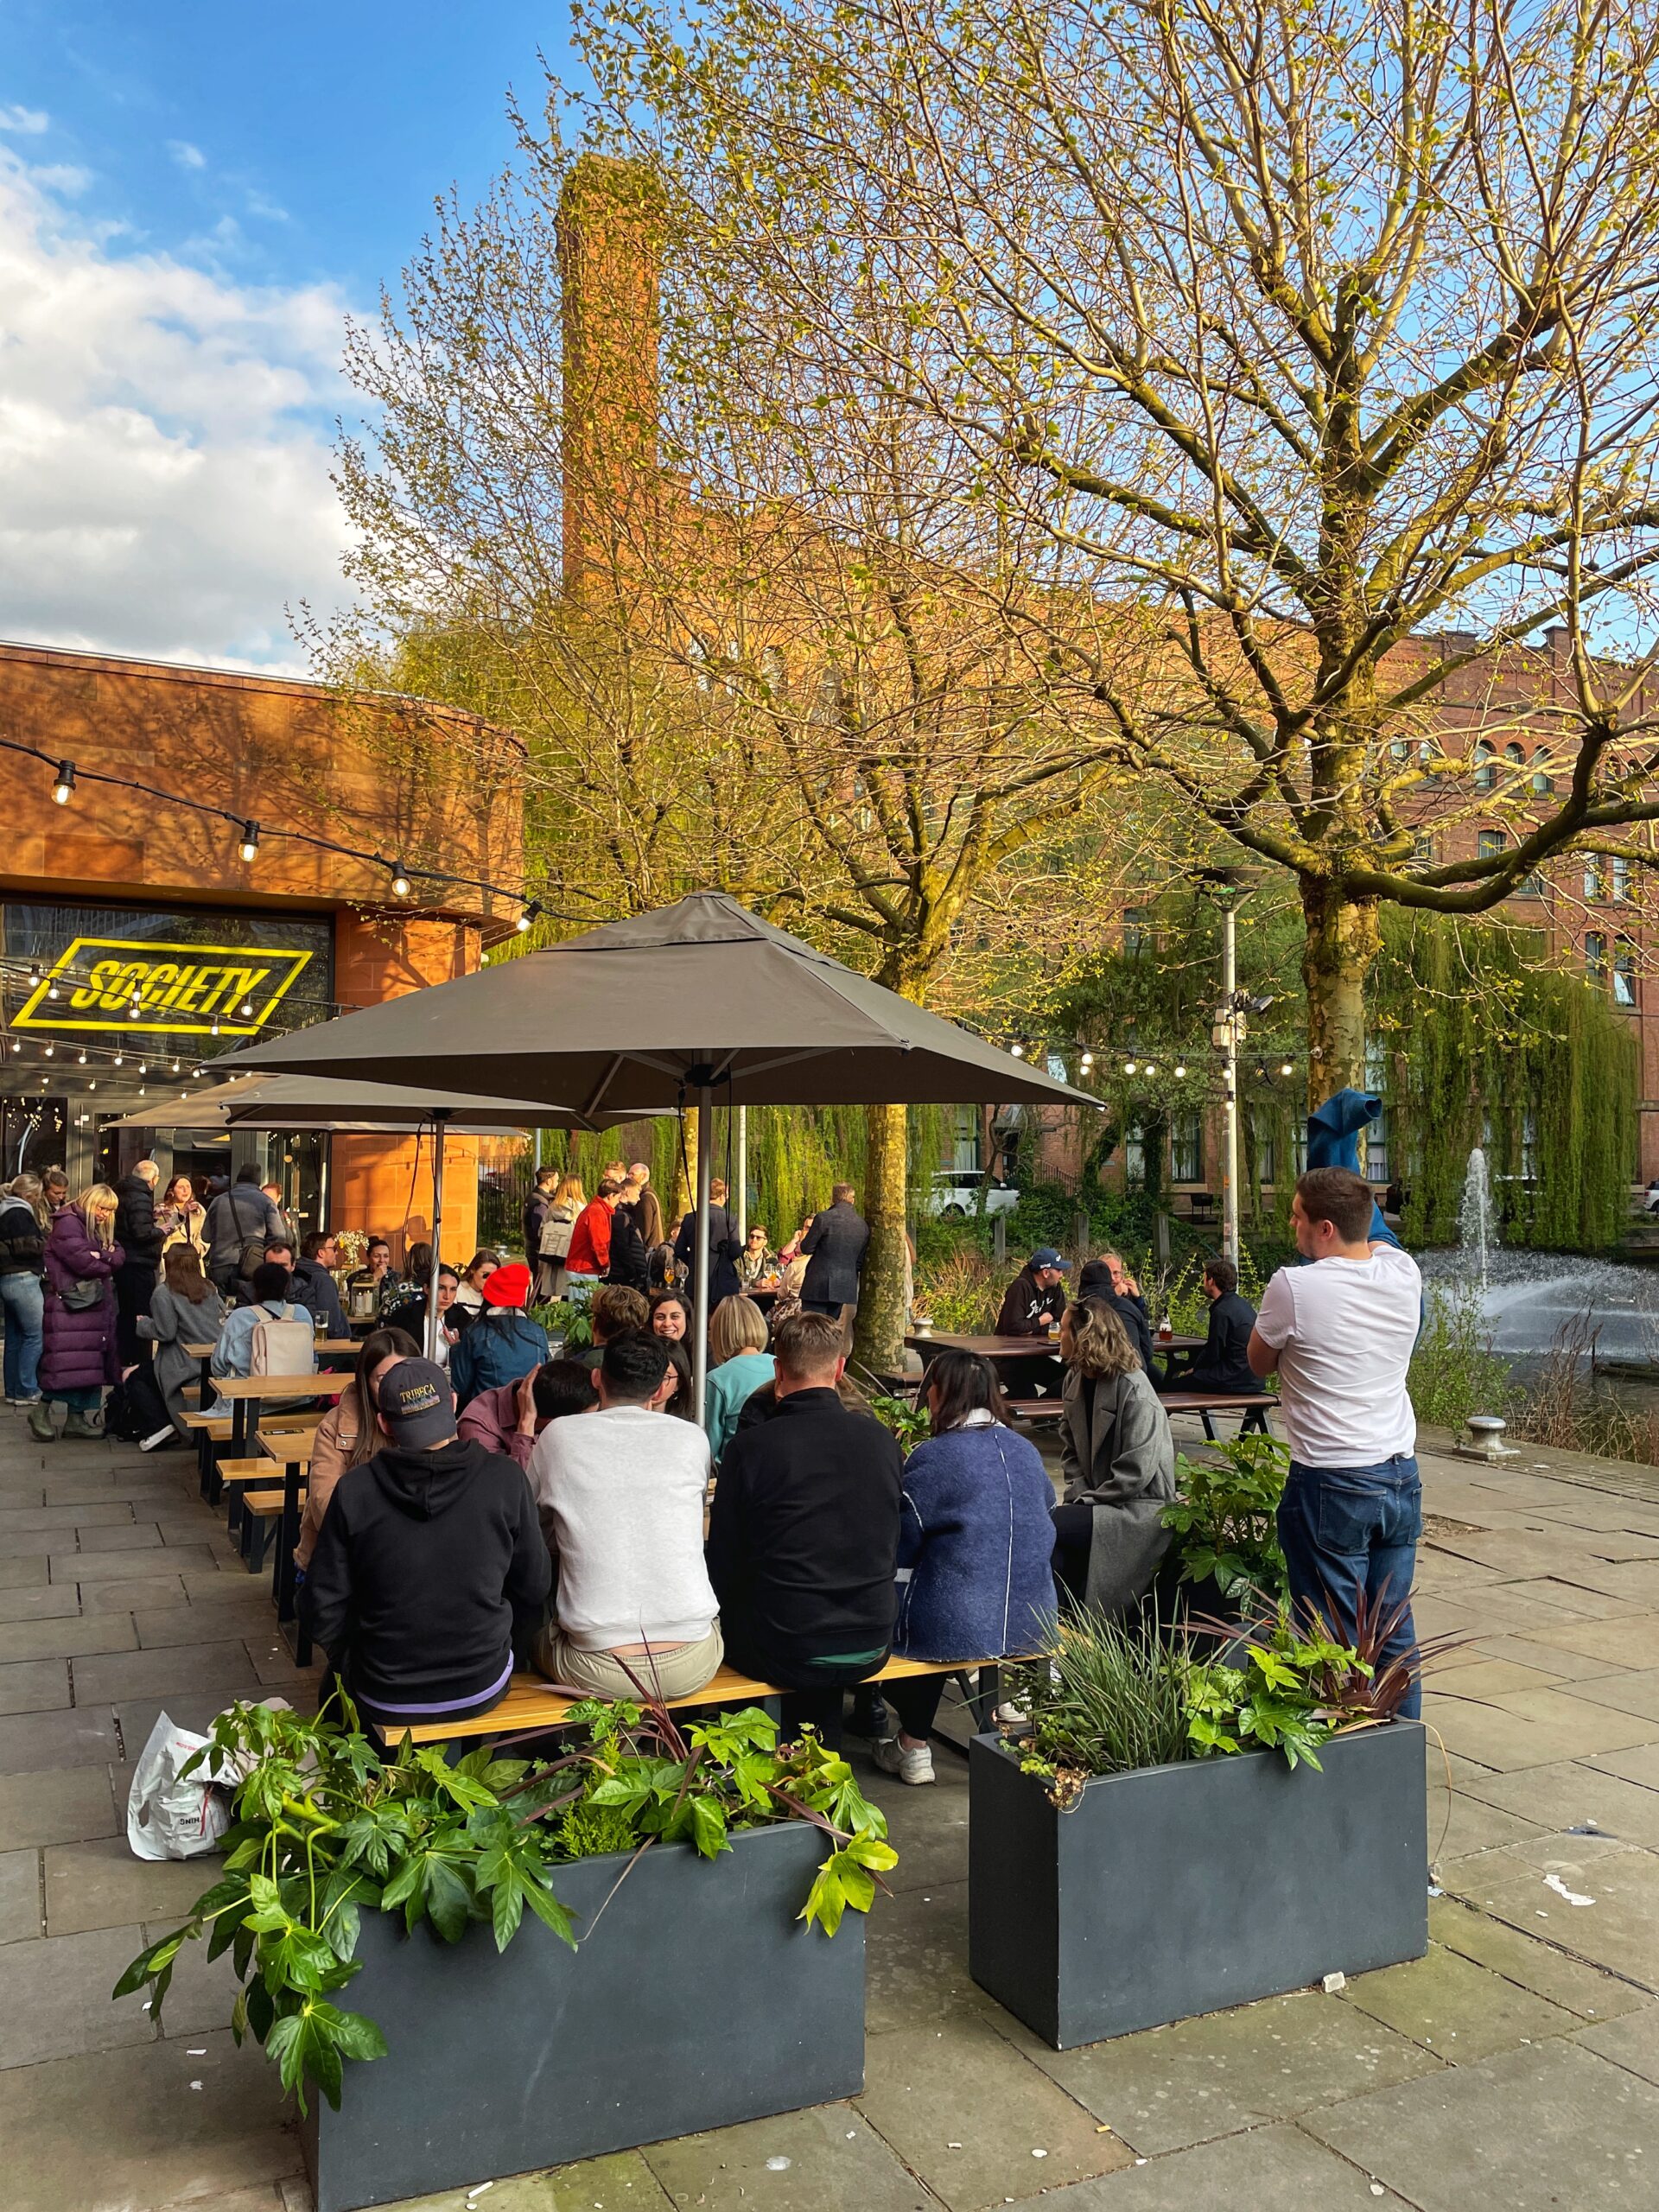 The beer garden at Society Manchester